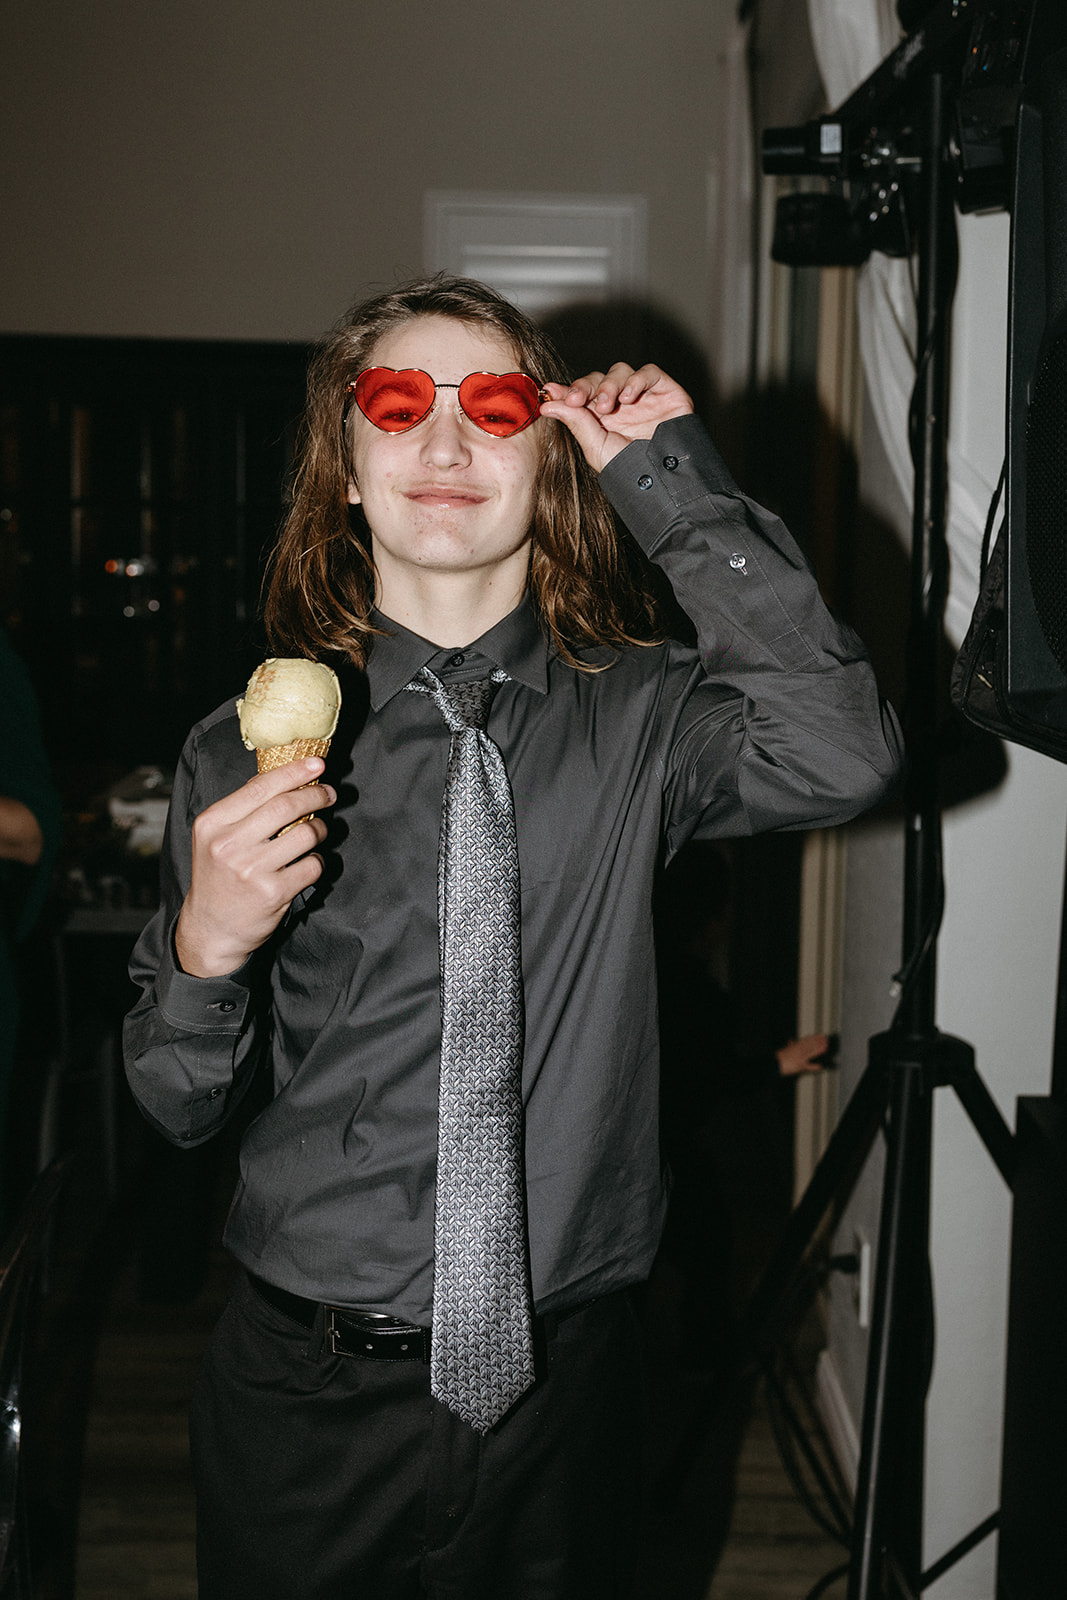 Guest wearing Red Glasses Party Favor & Eating Icecream during Modern Retro Vegas Reception 